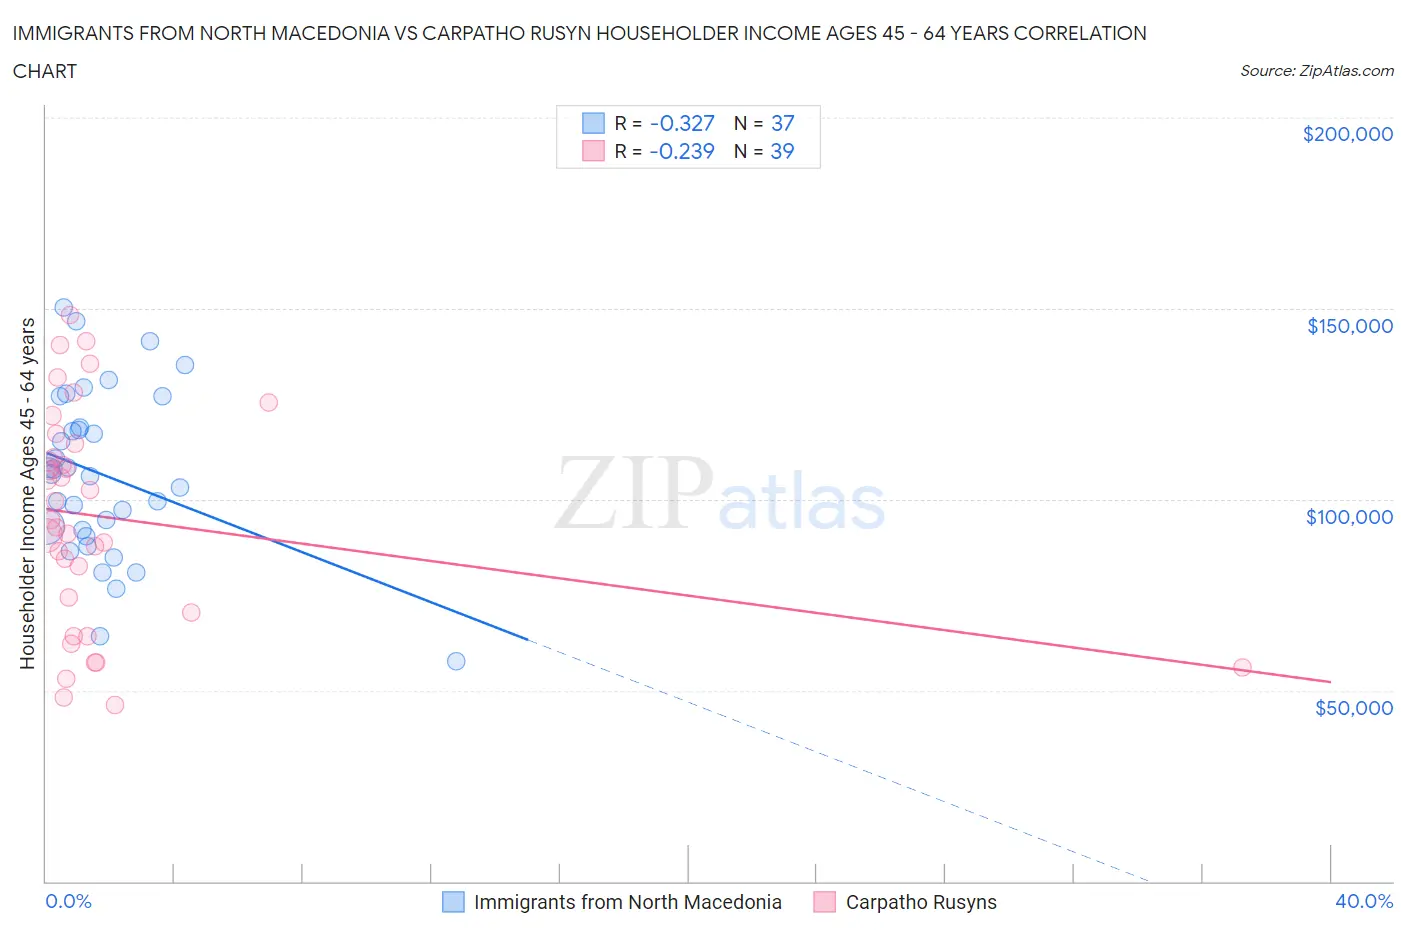 Immigrants from North Macedonia vs Carpatho Rusyn Householder Income Ages 45 - 64 years